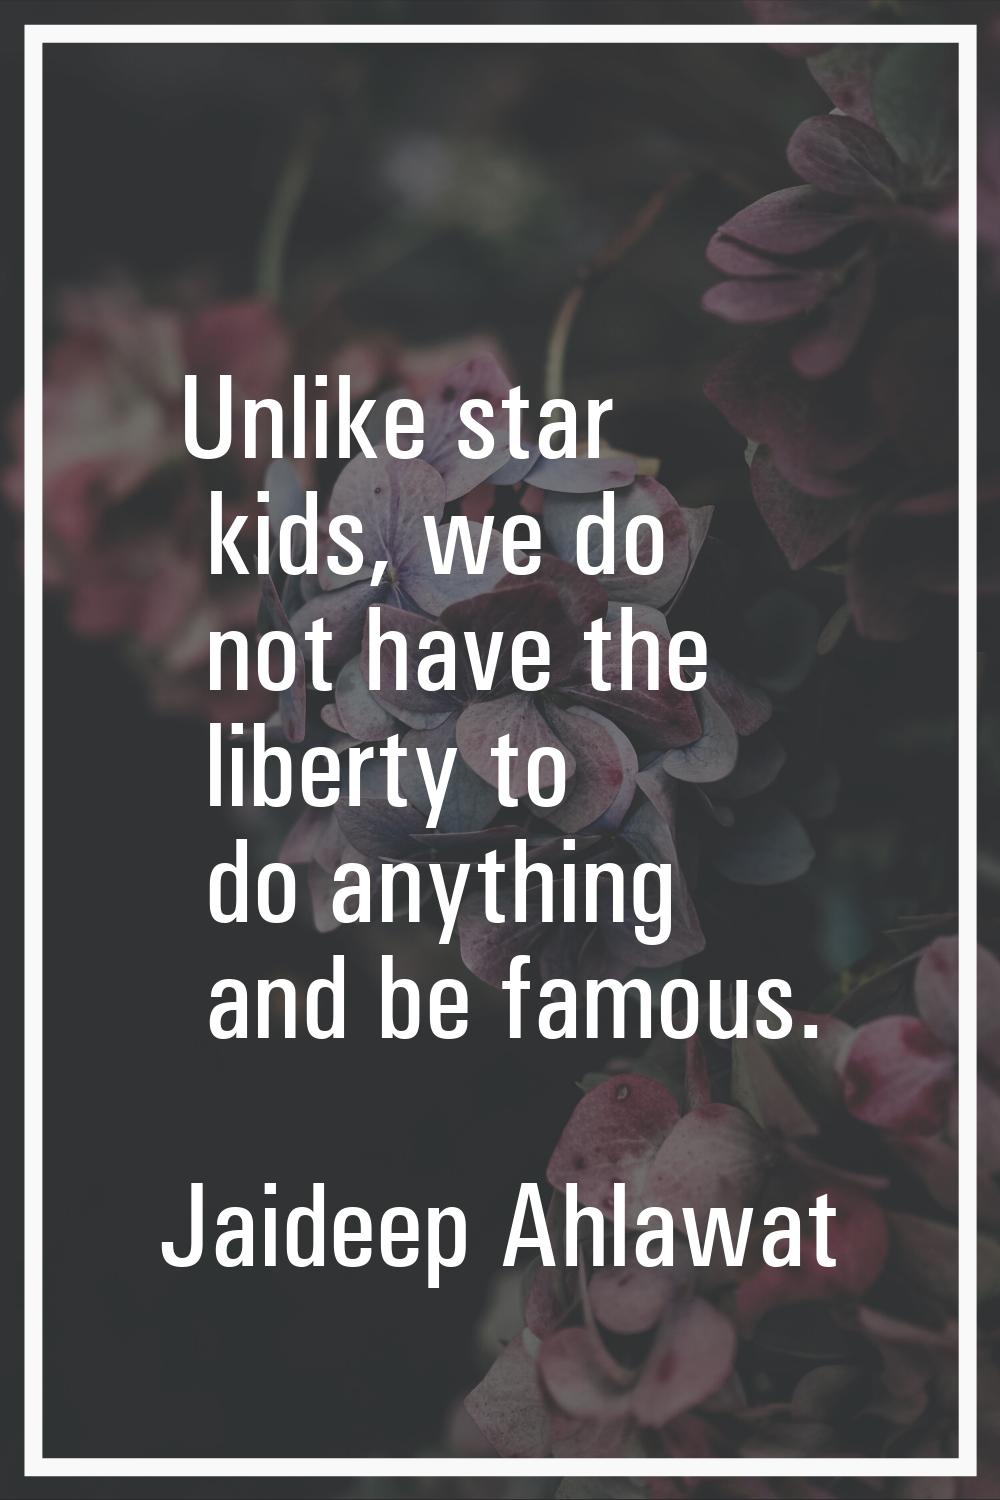 Unlike star kids, we do not have the liberty to do anything and be famous.